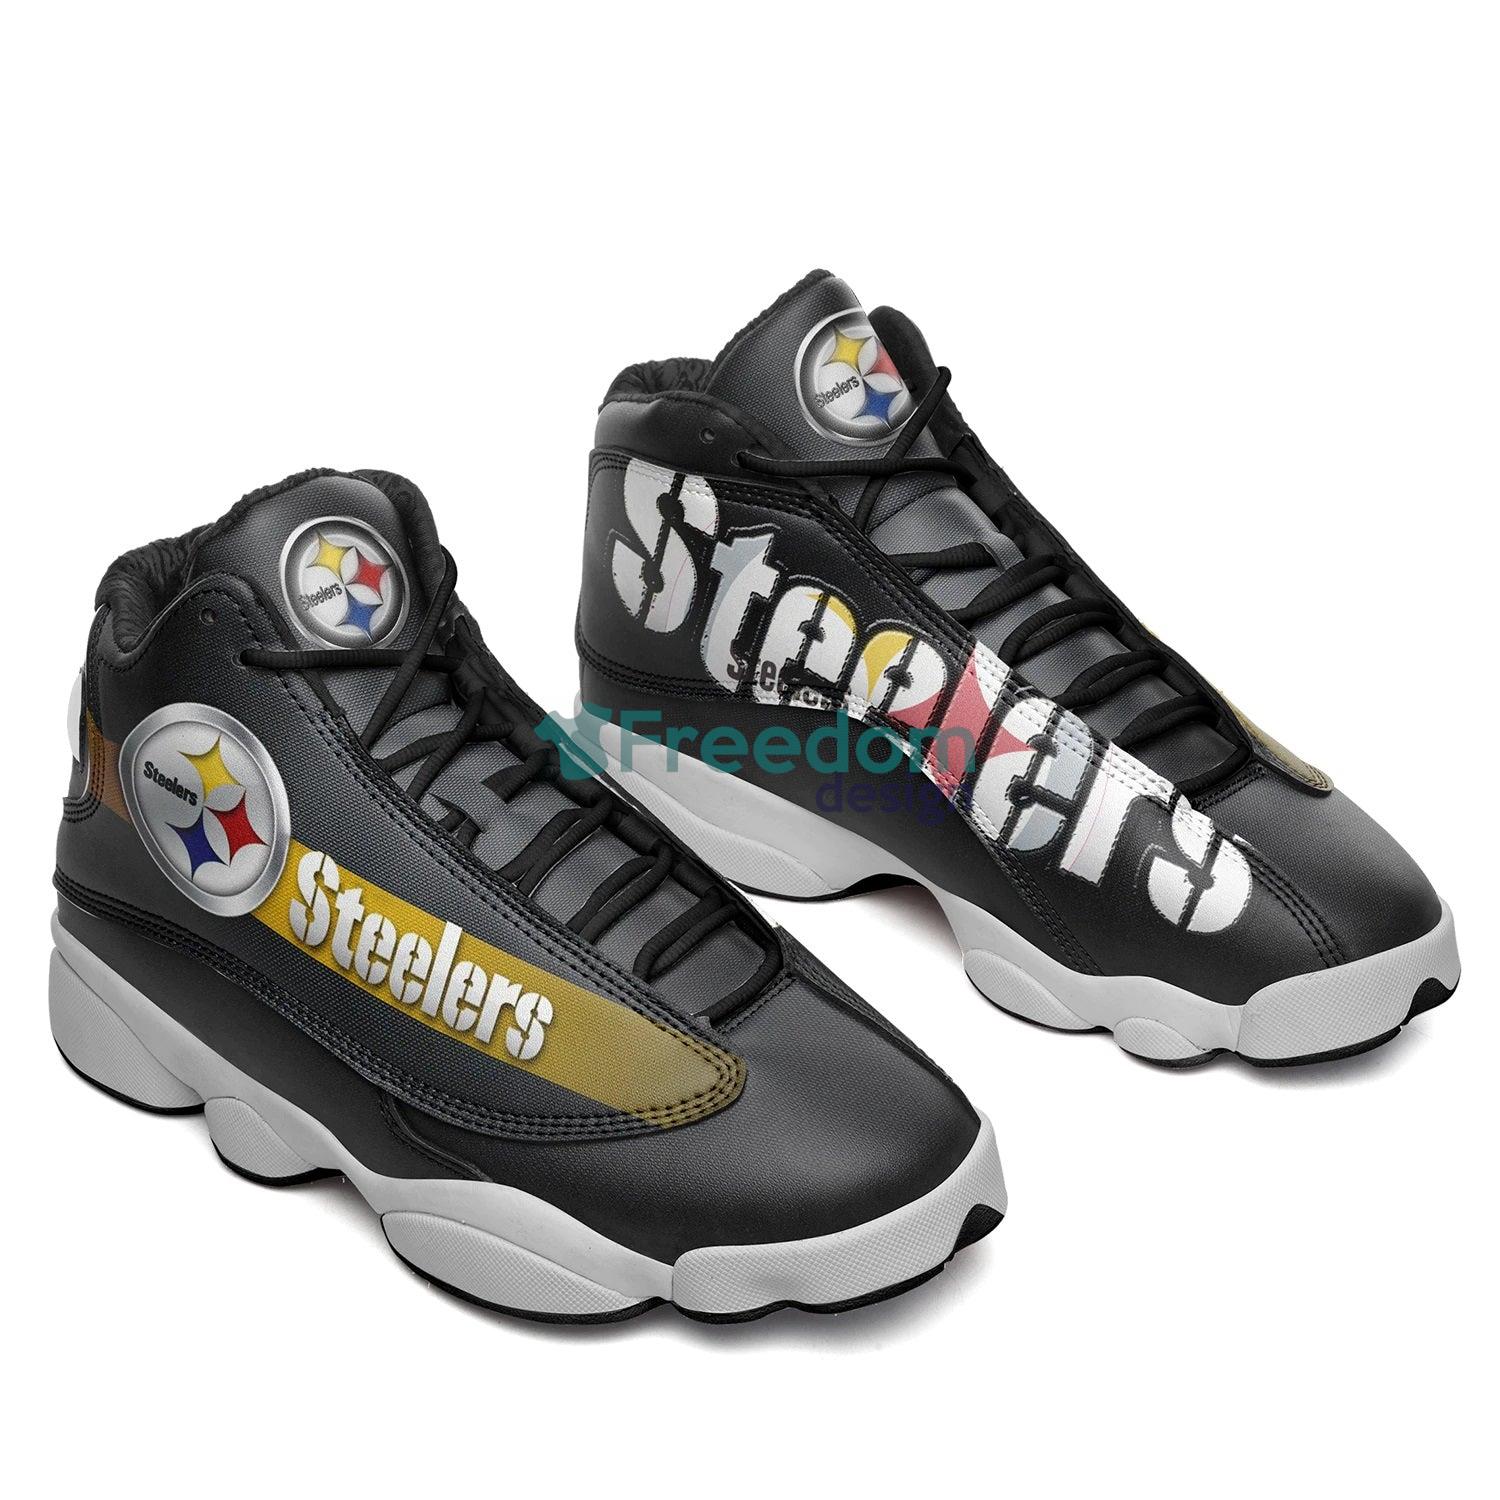 Pittsburgh Steelers Team Air Jordon Shoes For Fans